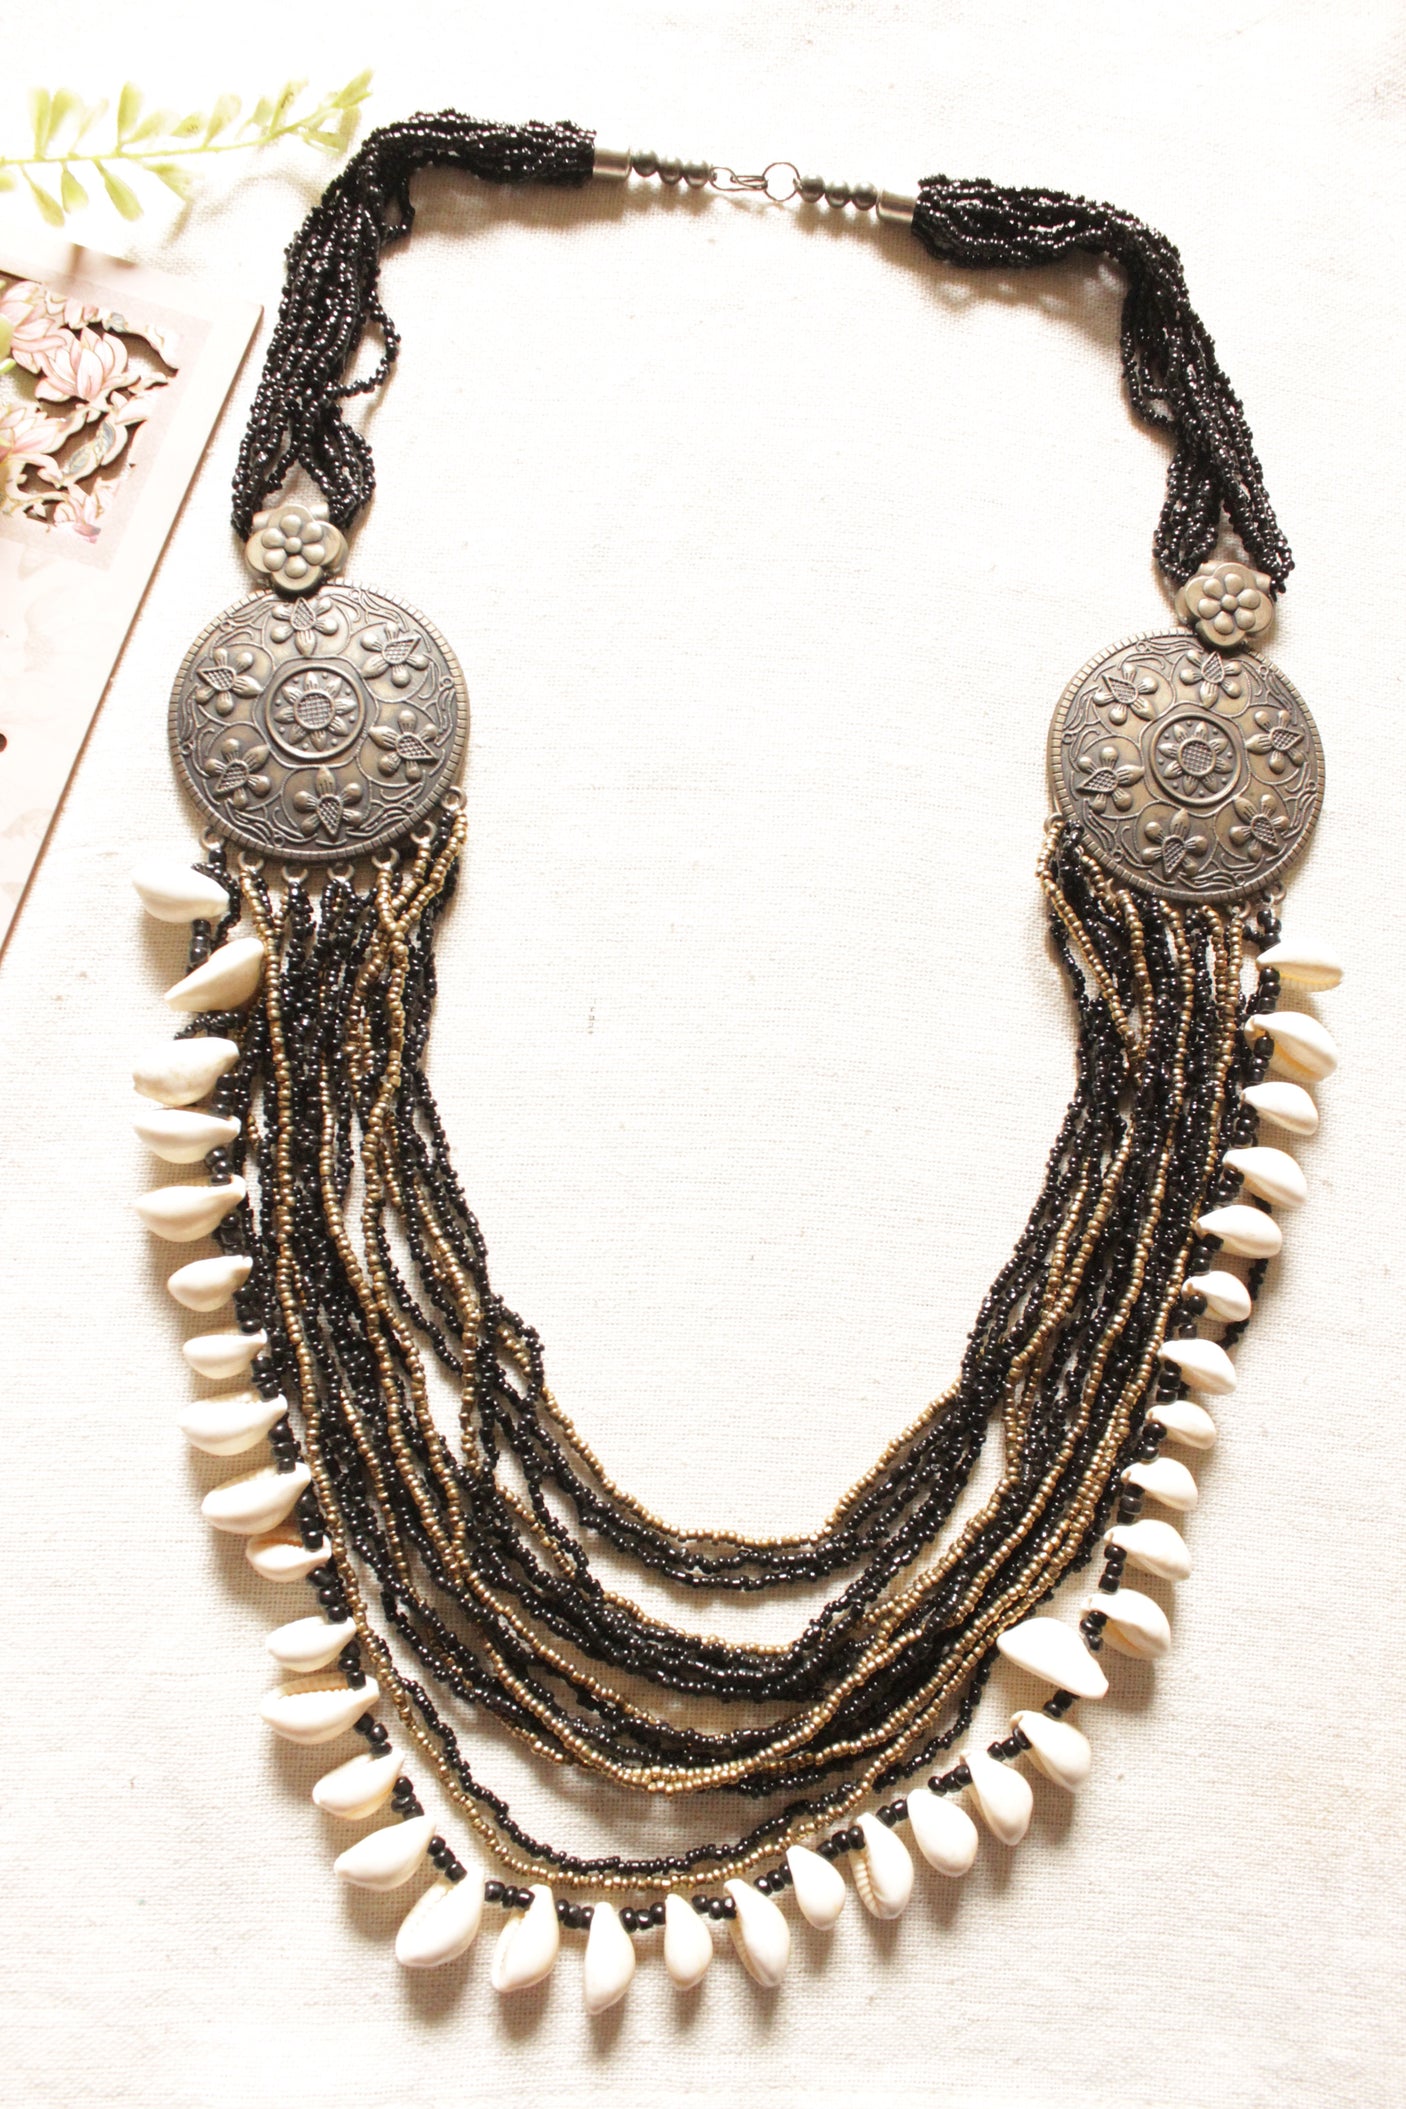 Black and Bronze Beads Multi-Layer Necklace with Shell Detailing